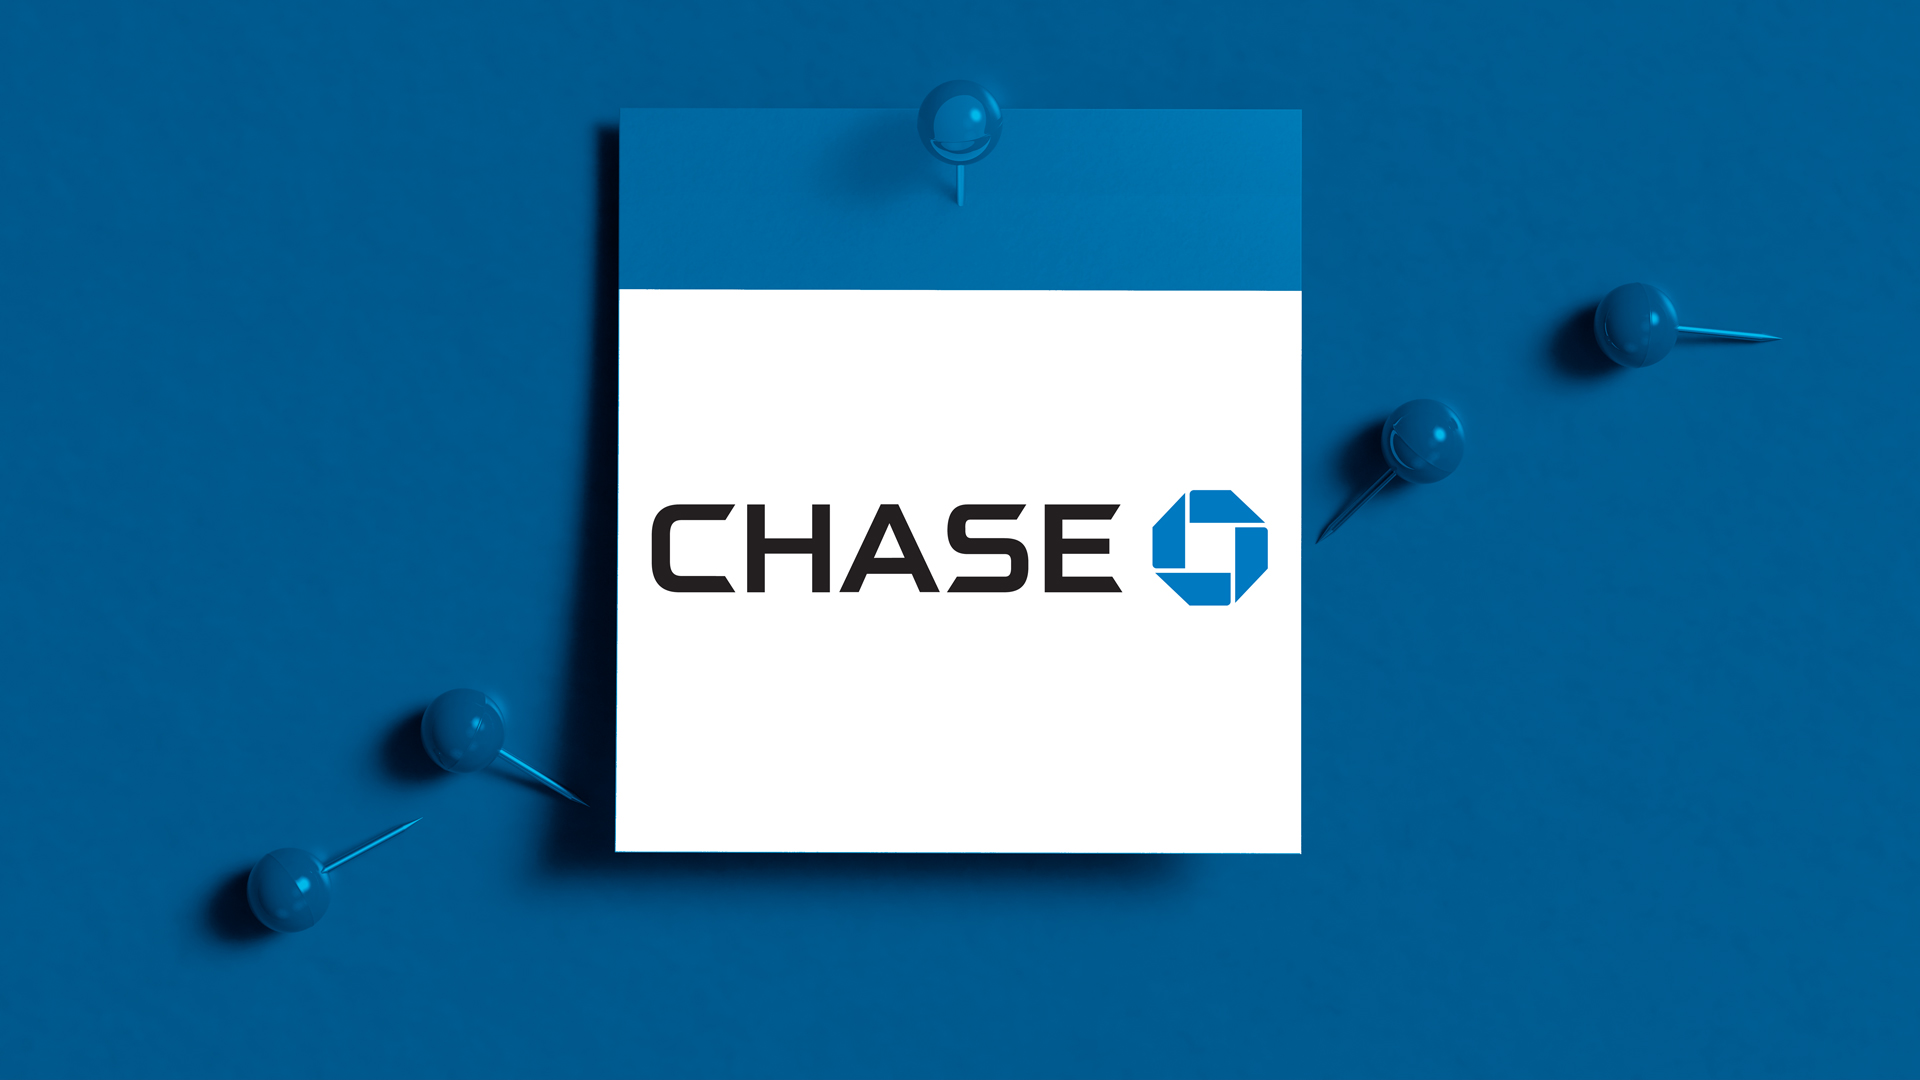 chase bank currency exchange fee